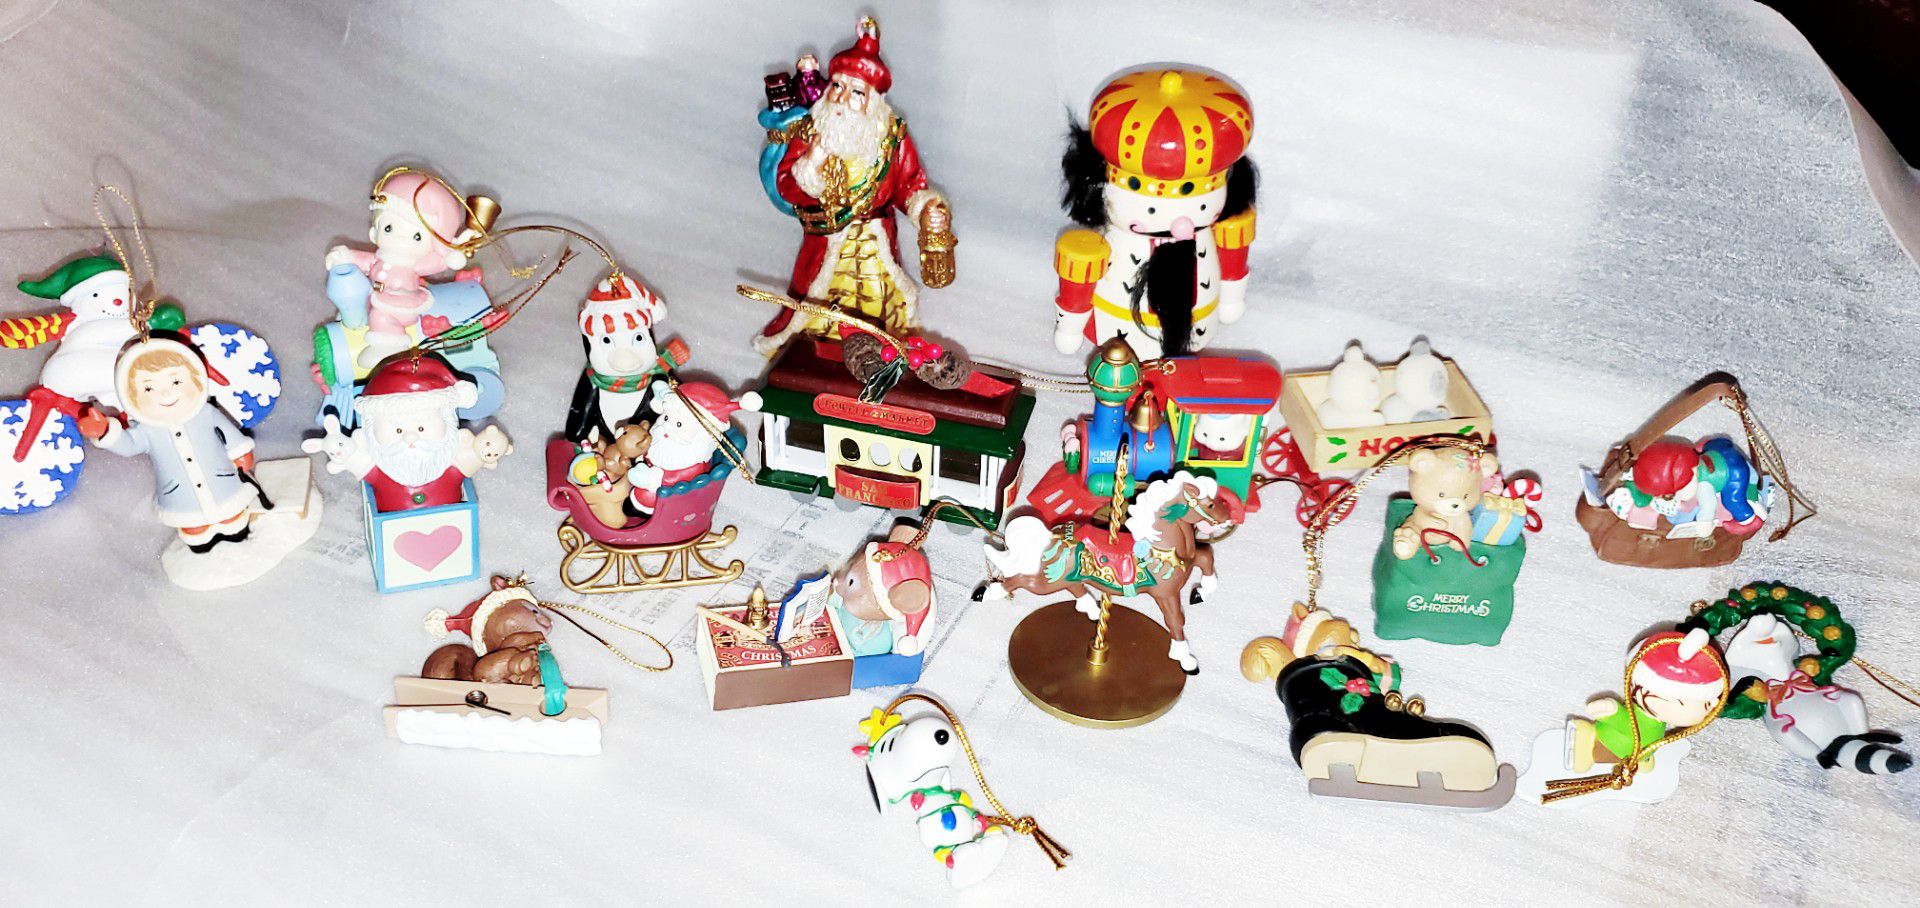 20 of Christmas Tree exclusive collection ornaments decor